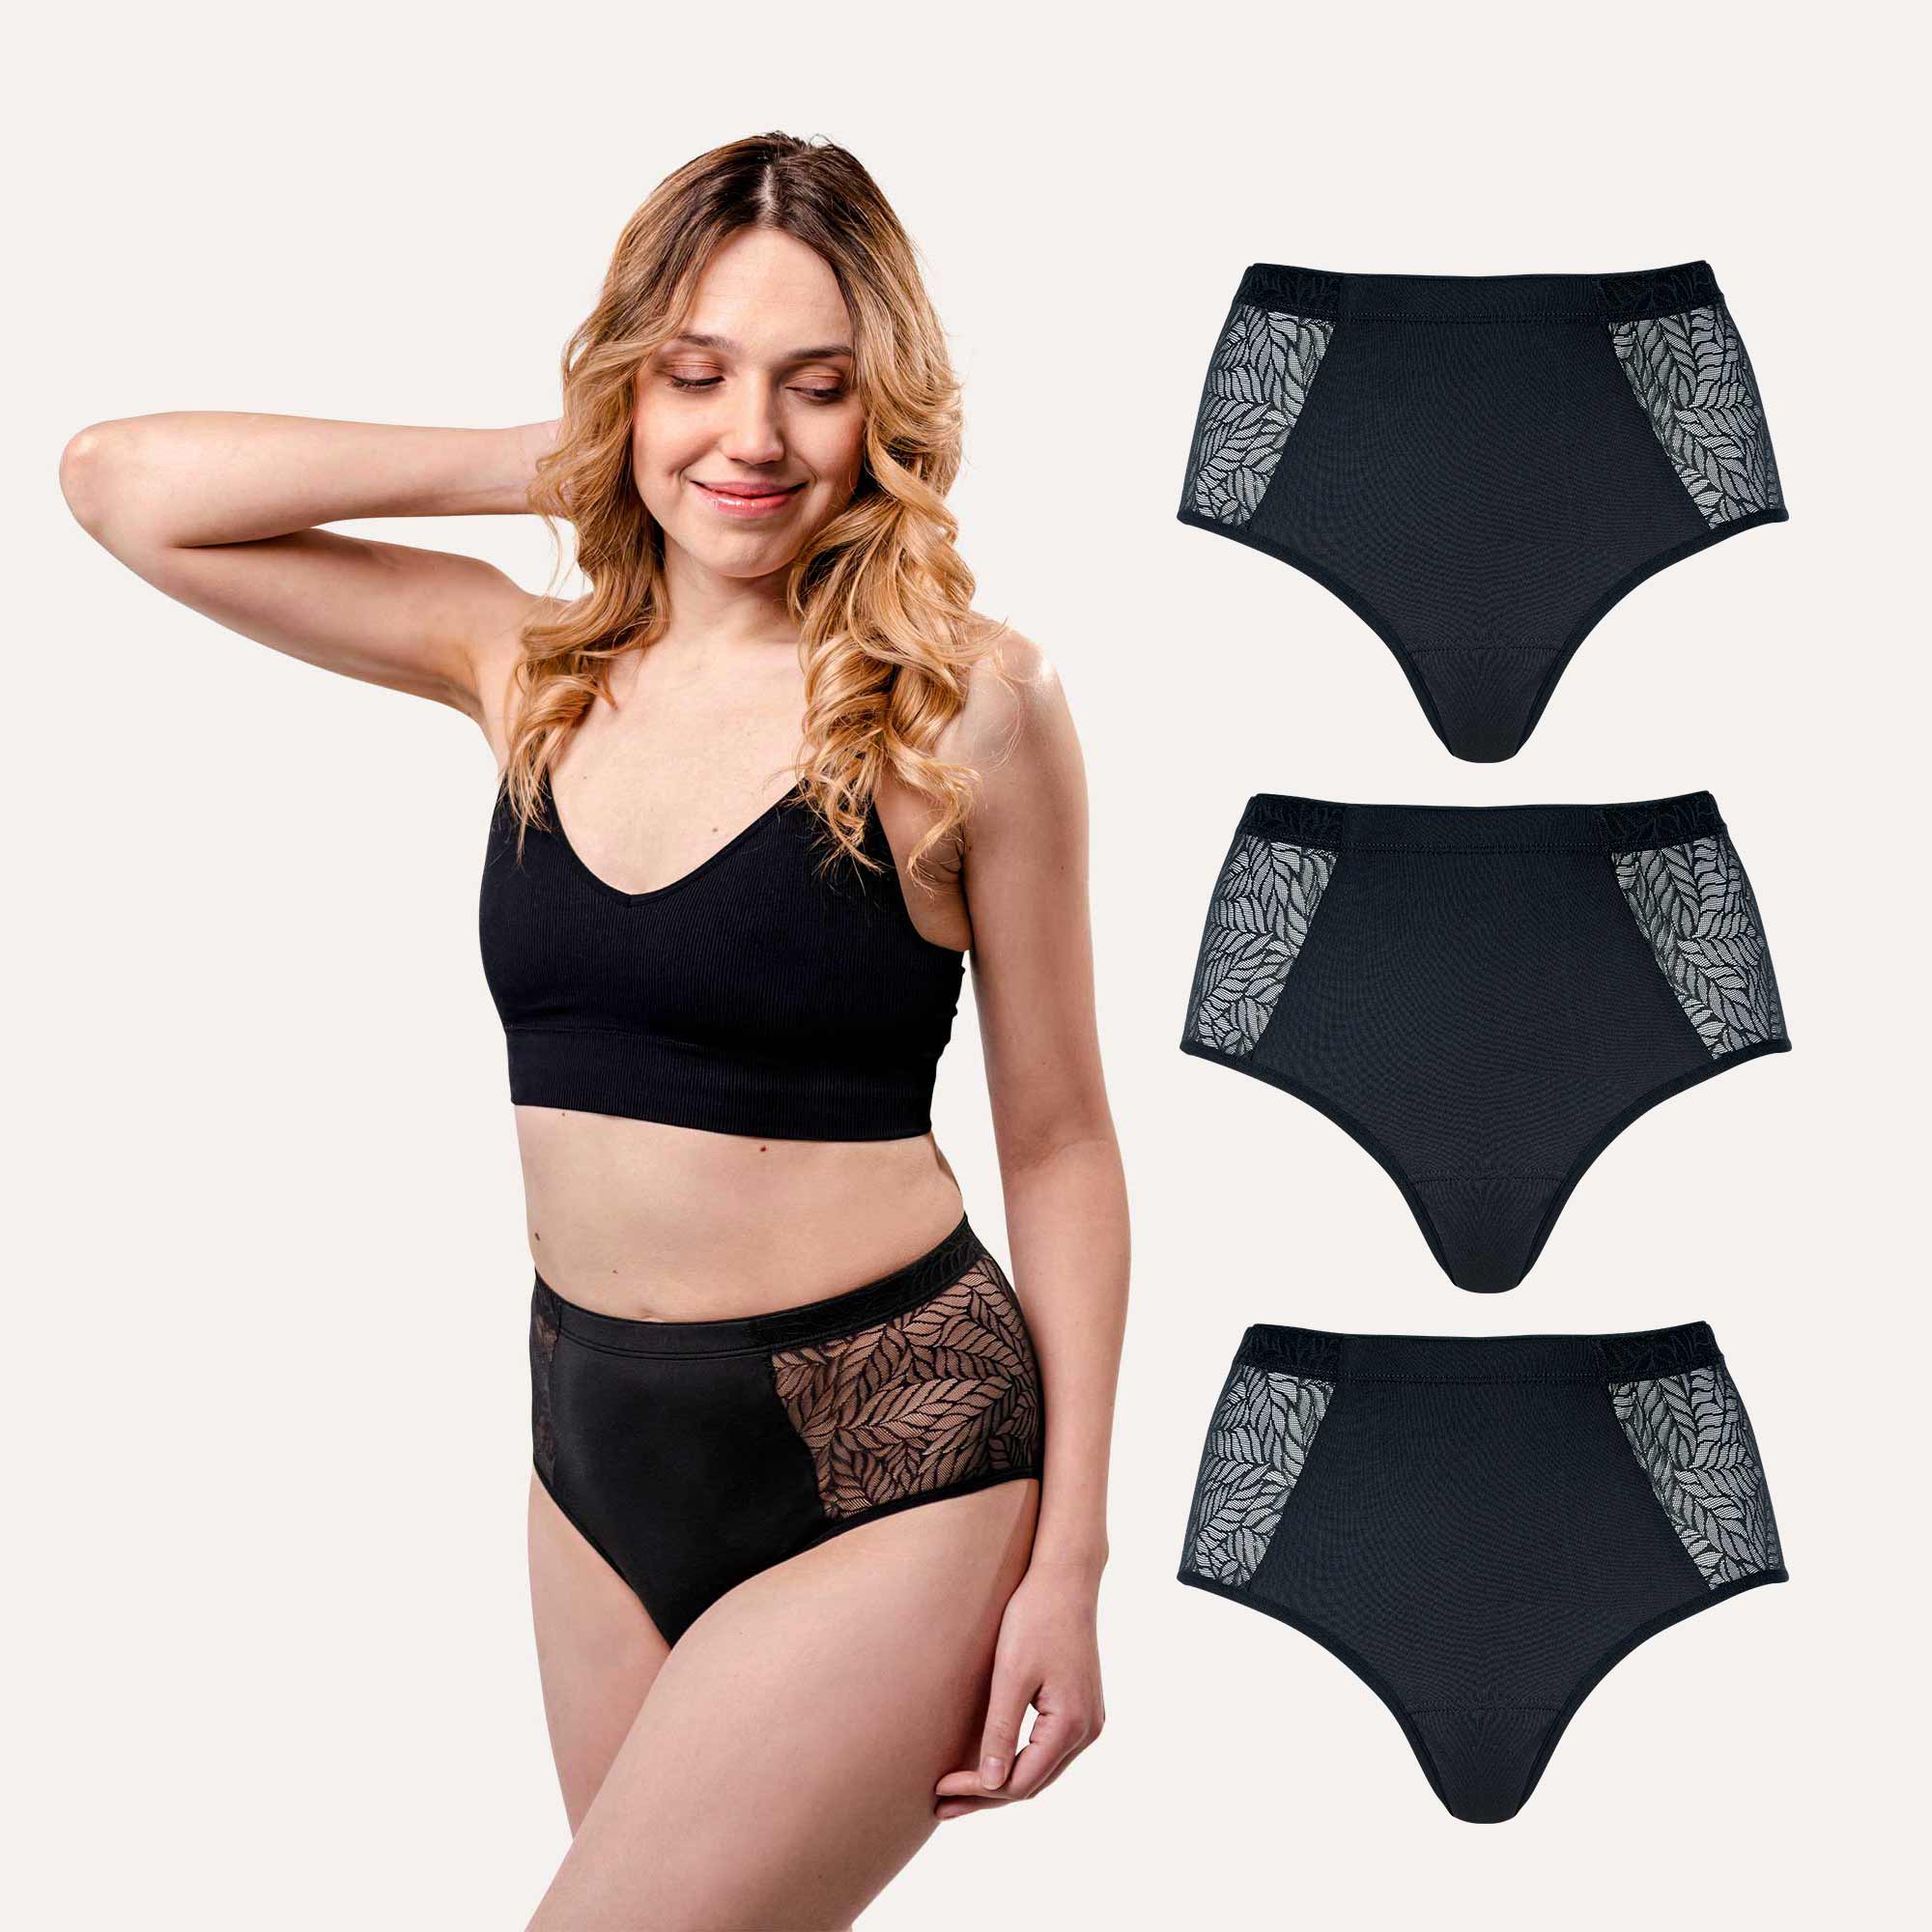 Period Underwear Recycled Lace Leaf High Waist (Multipack of 3)